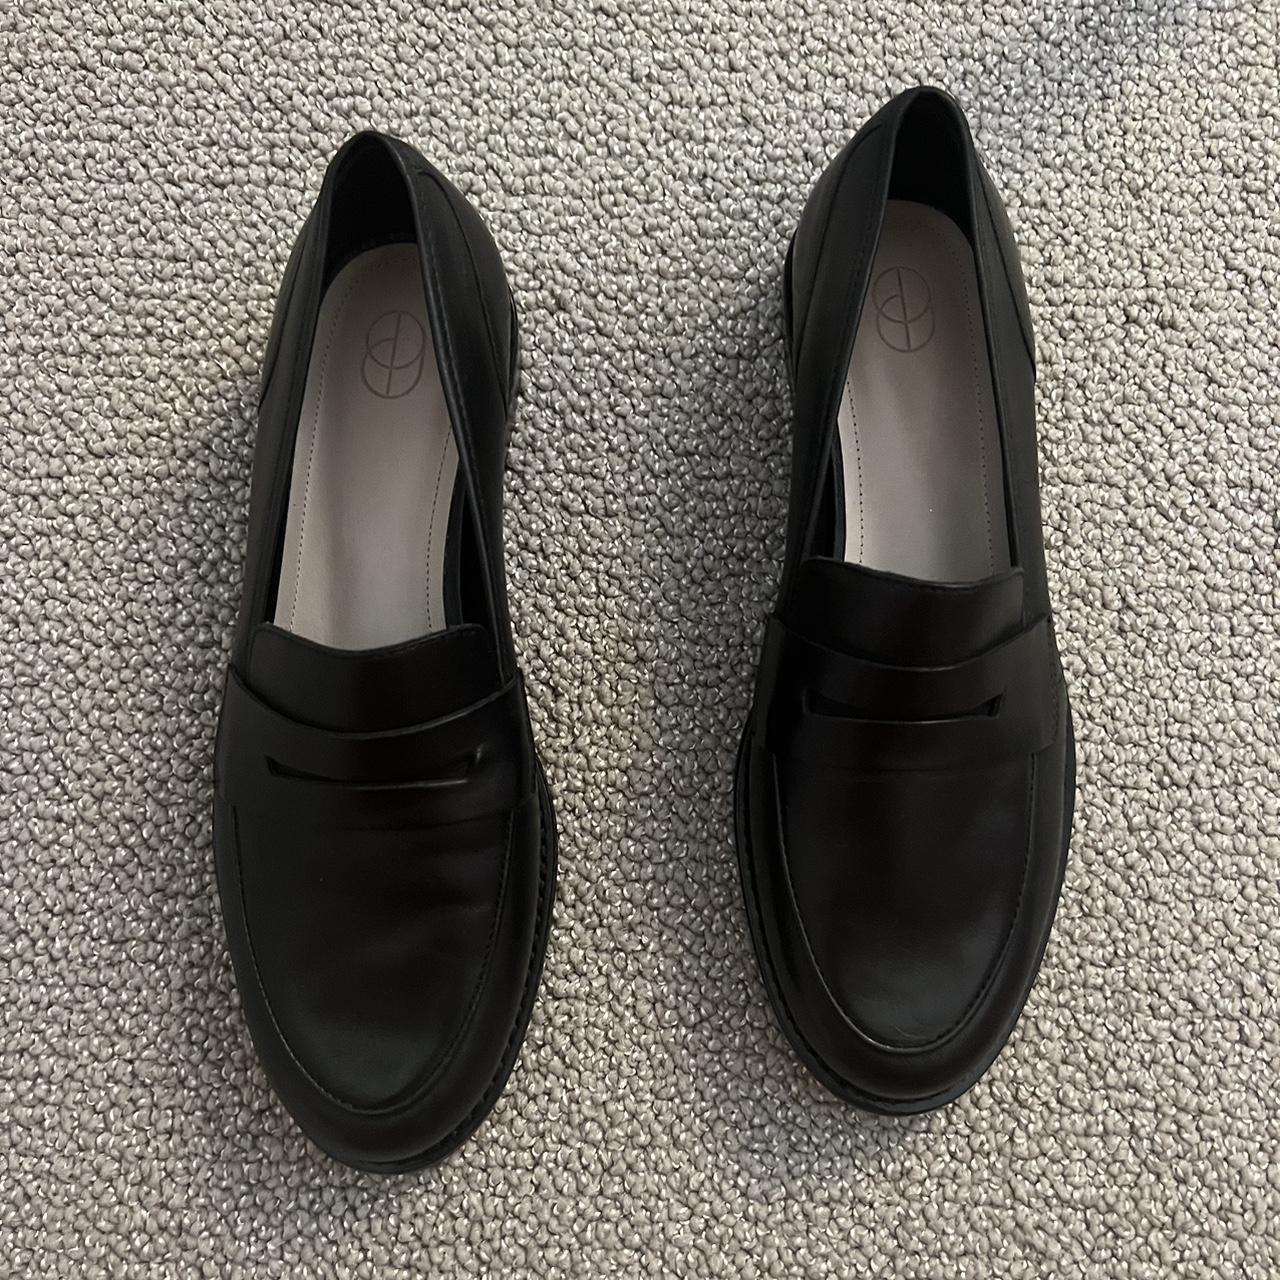 Never worn black loafers from Porte & Paire size... - Depop